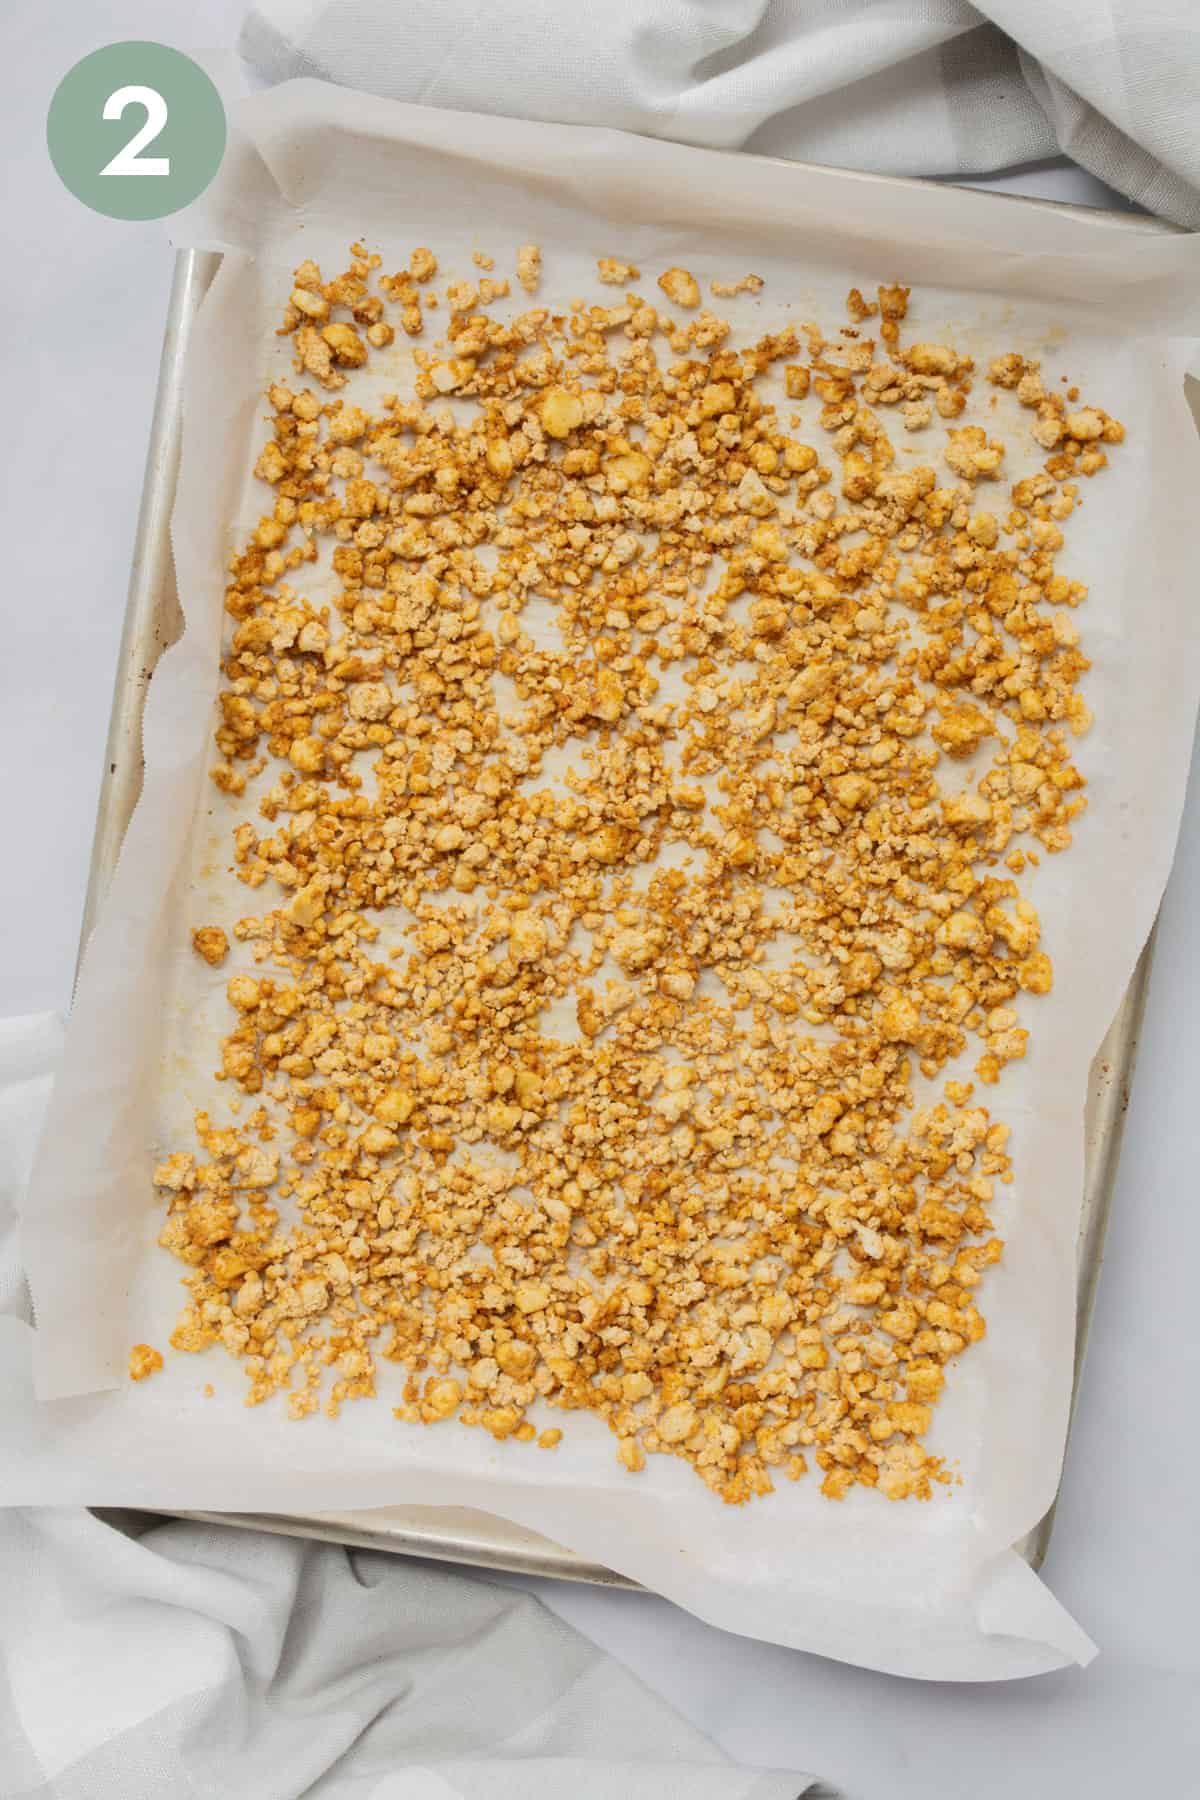 Crumbled tofu on a baking sheet with parchment paper after being baked.